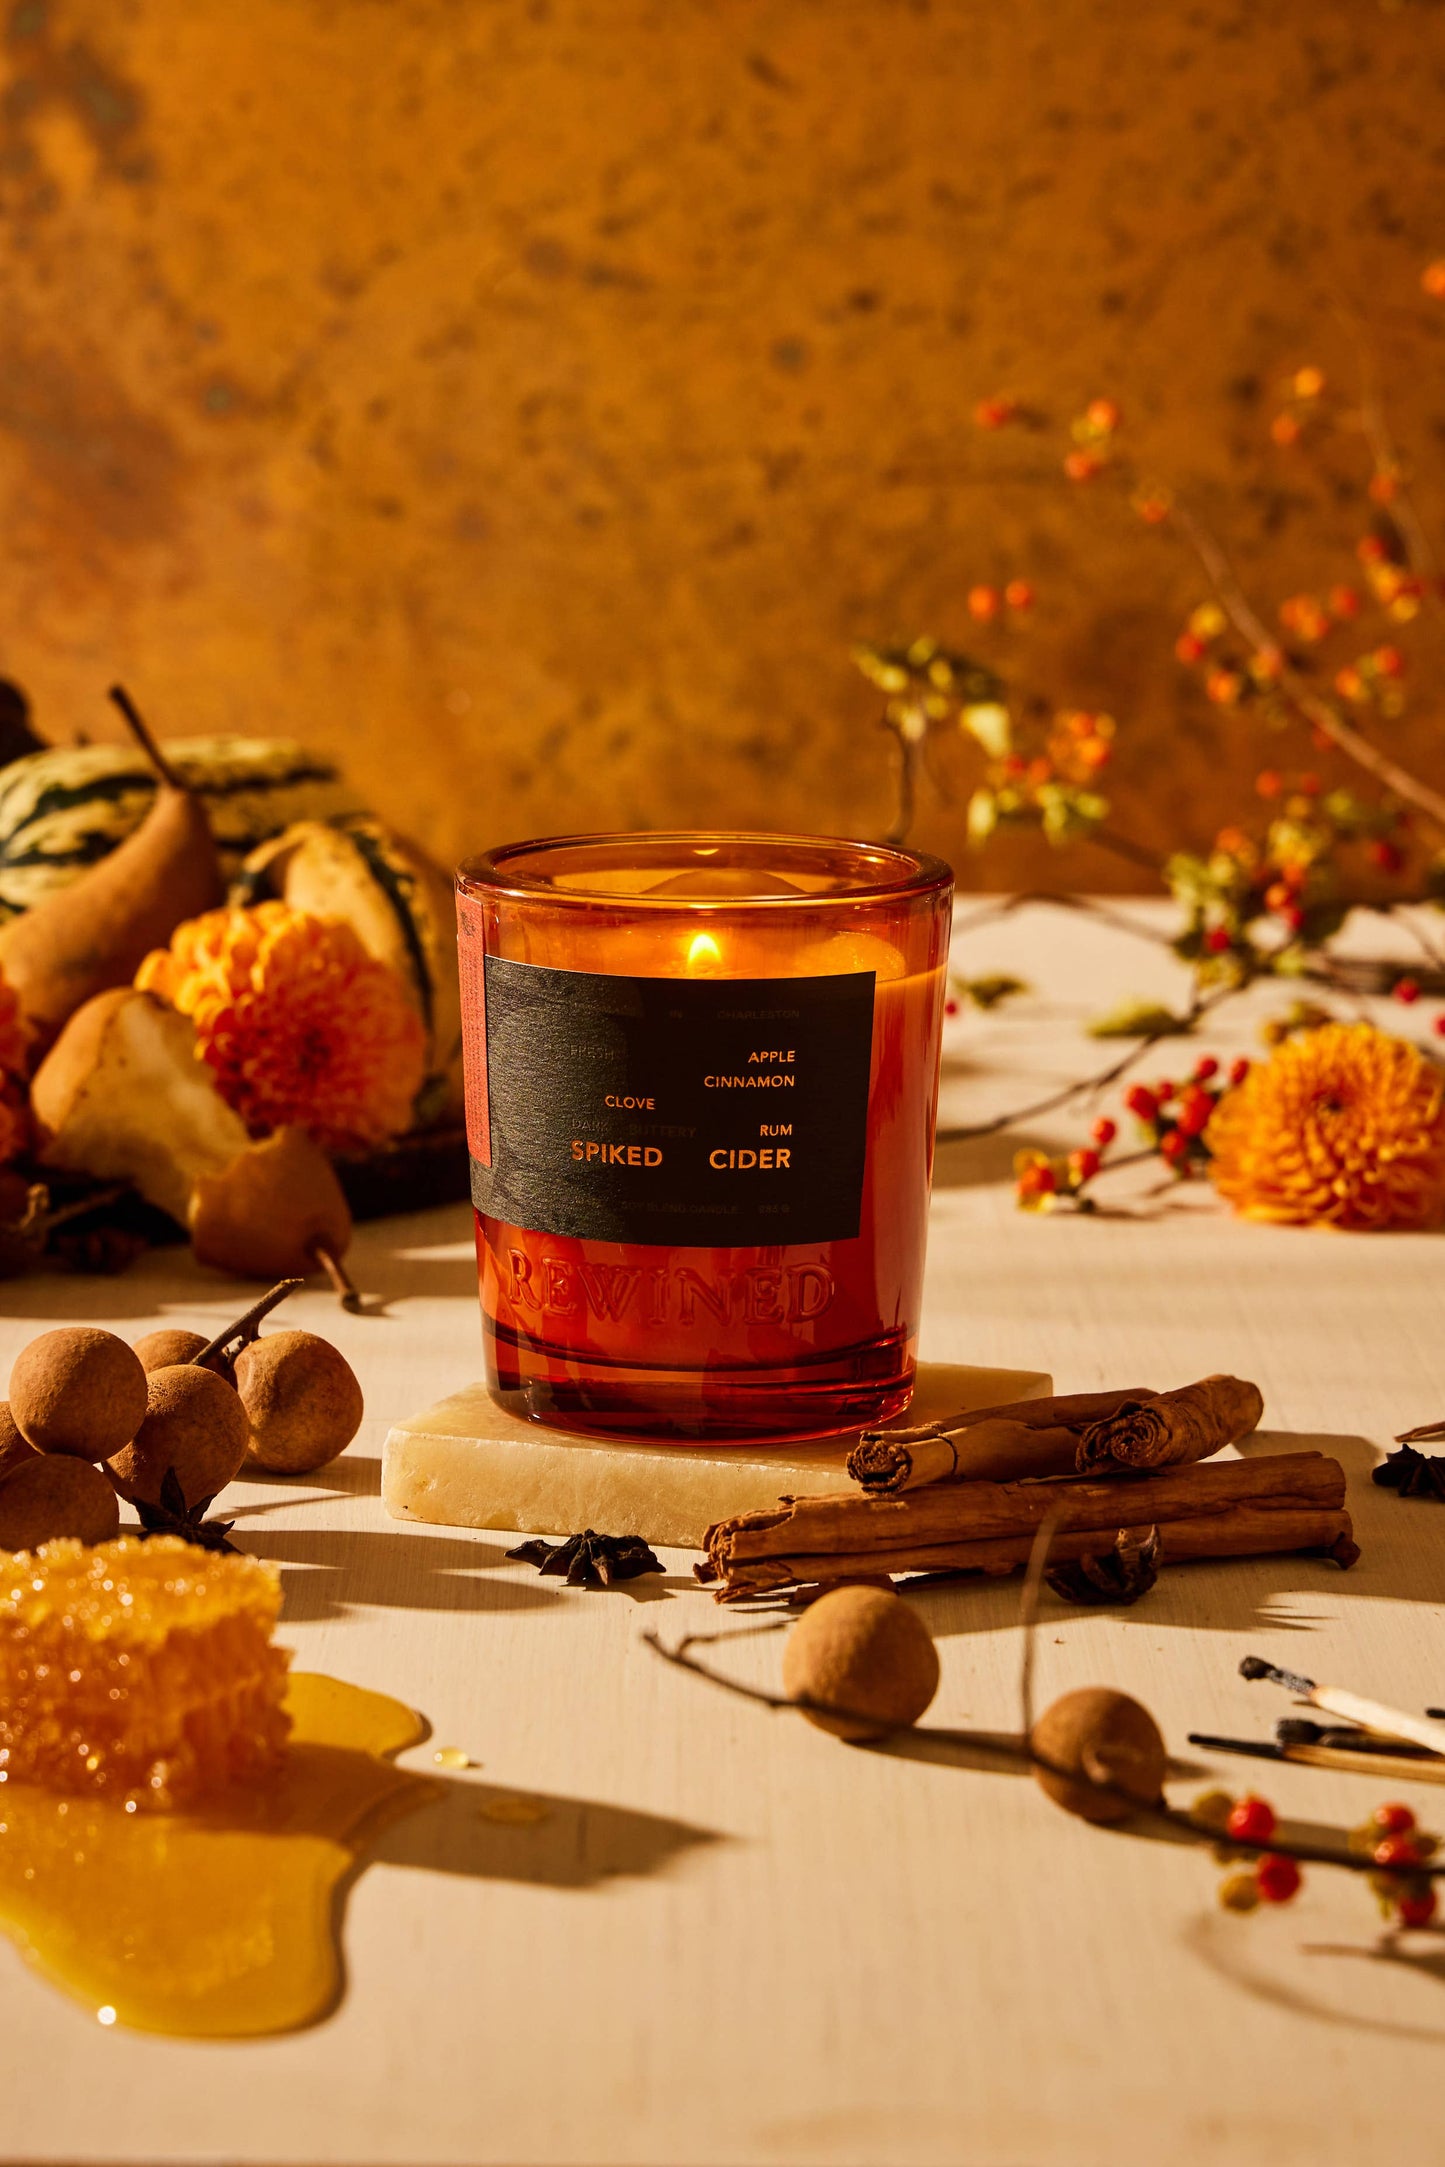 Rewined Spiked Cider Candle 6 oz